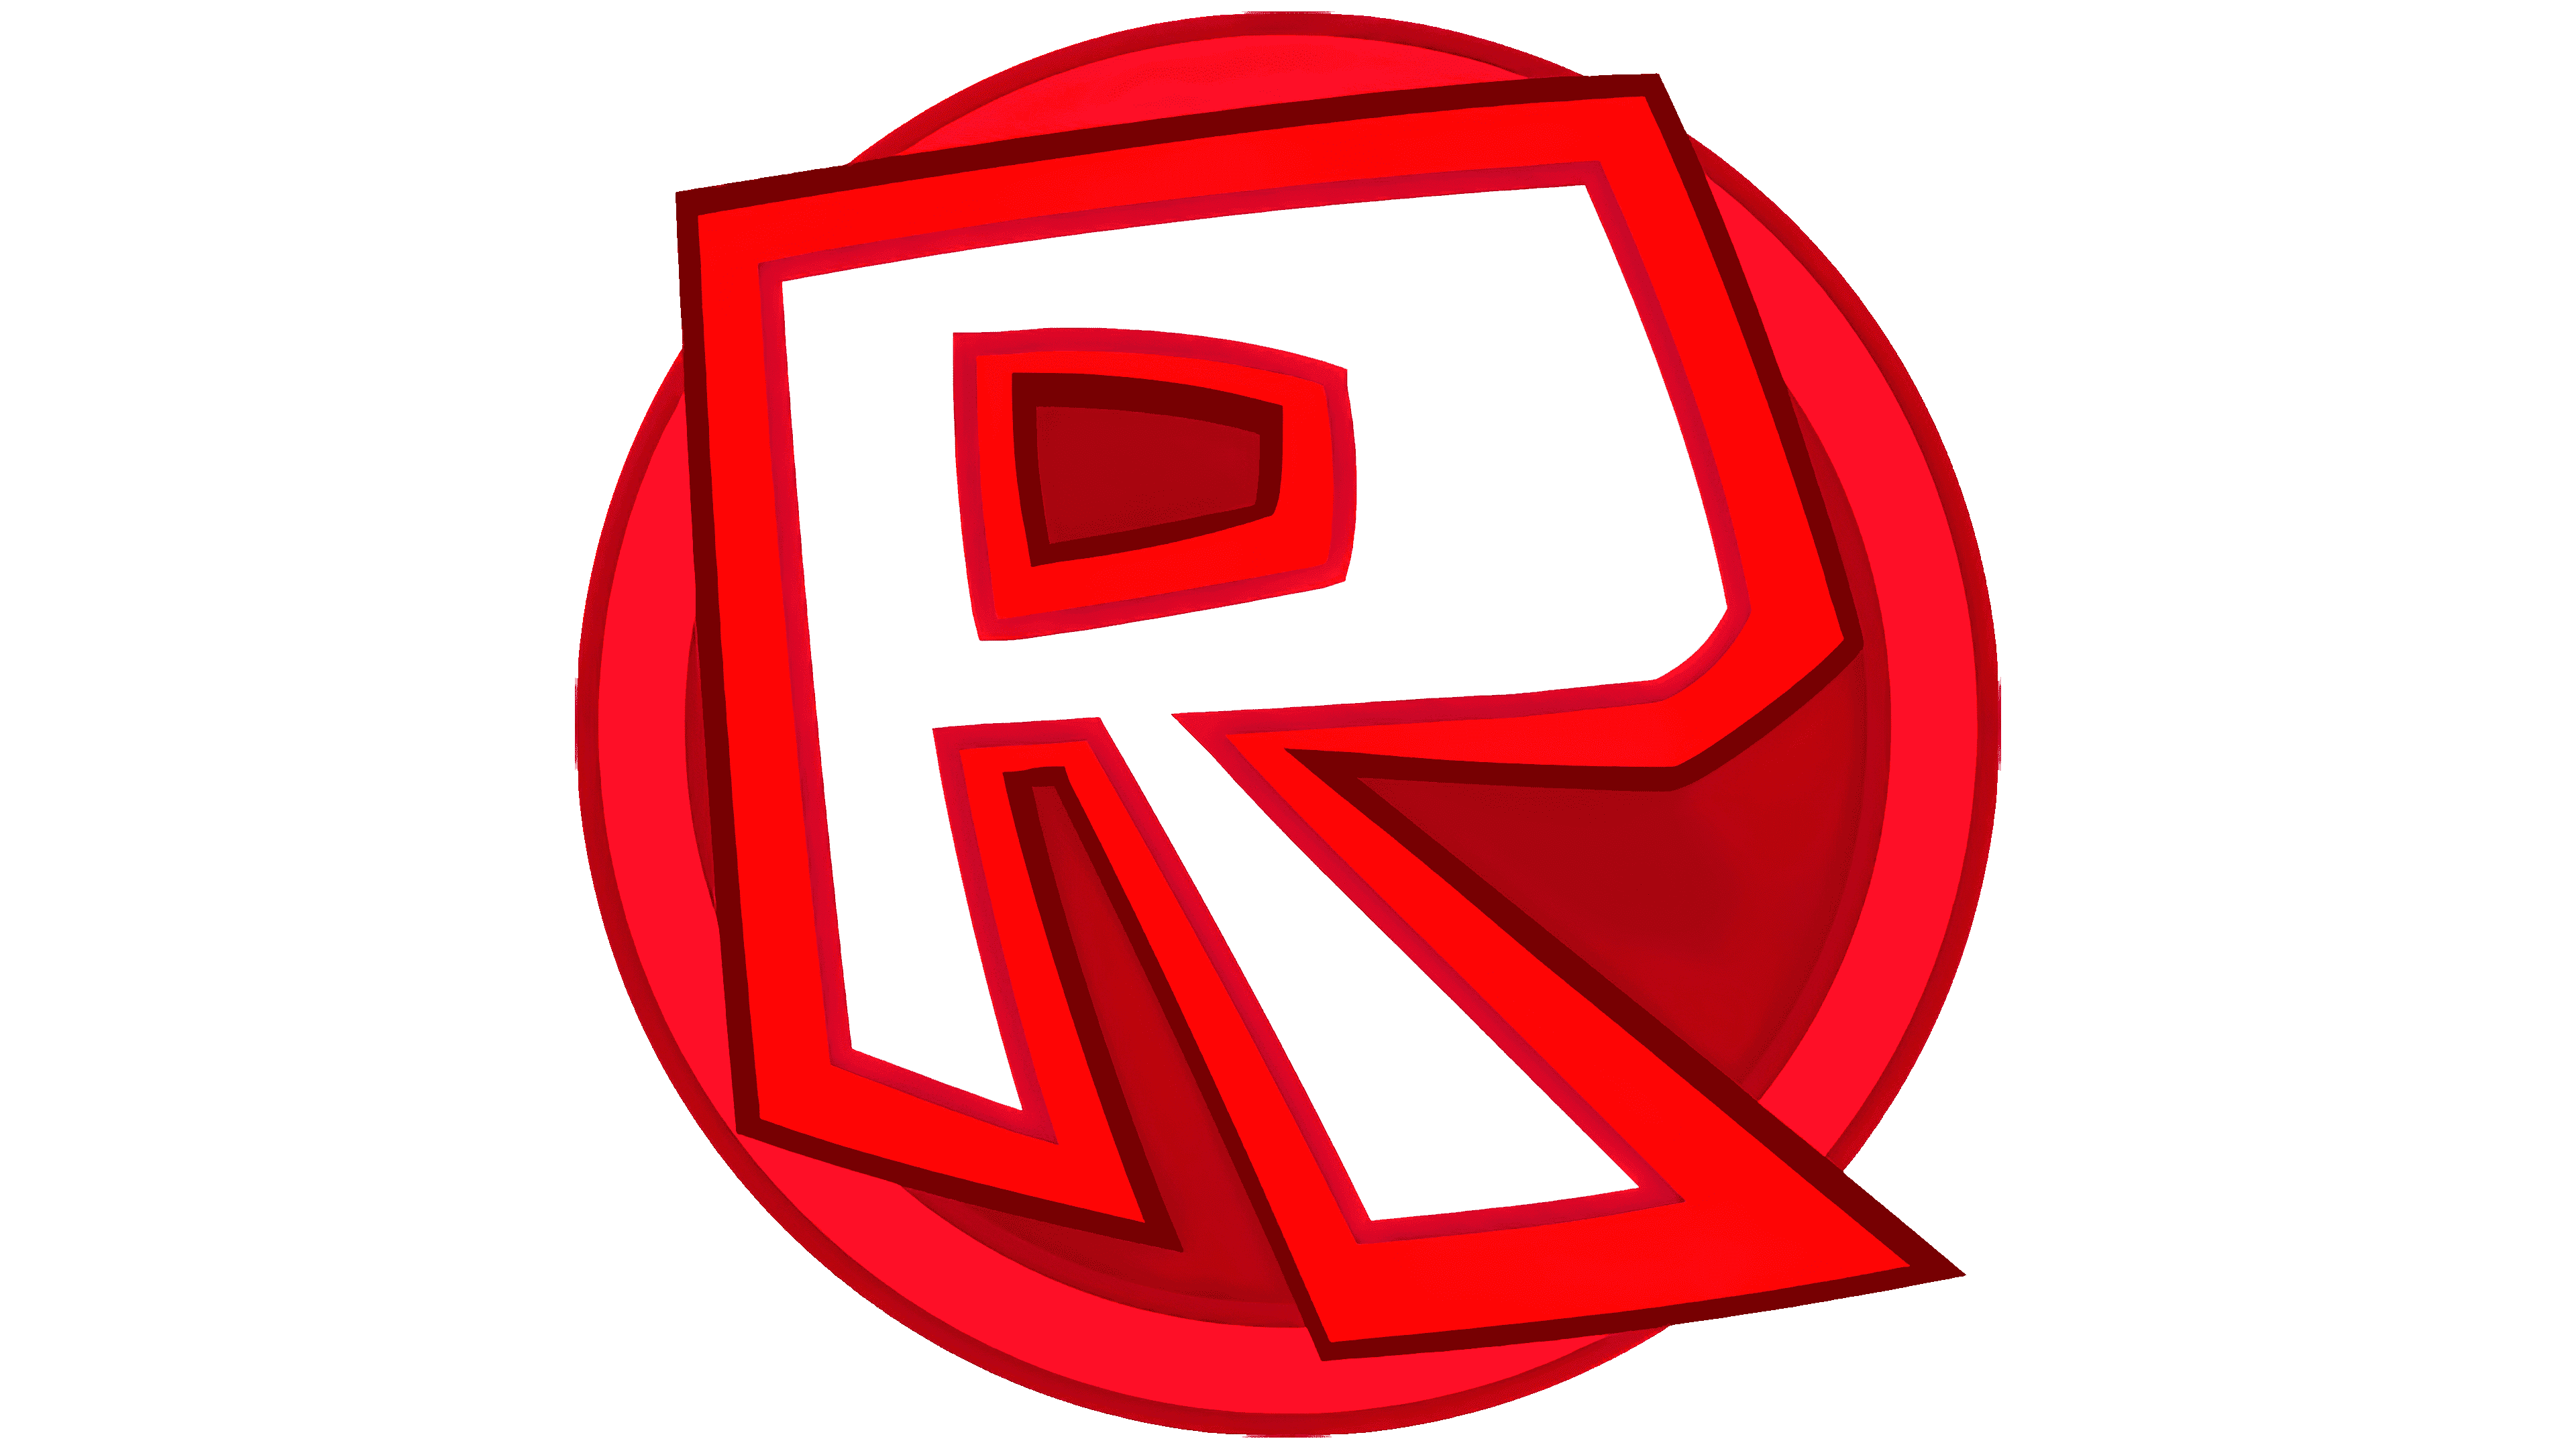 Roblox Logo 2015 2017 In HD PNG With Transparent Background - Image ID  489322